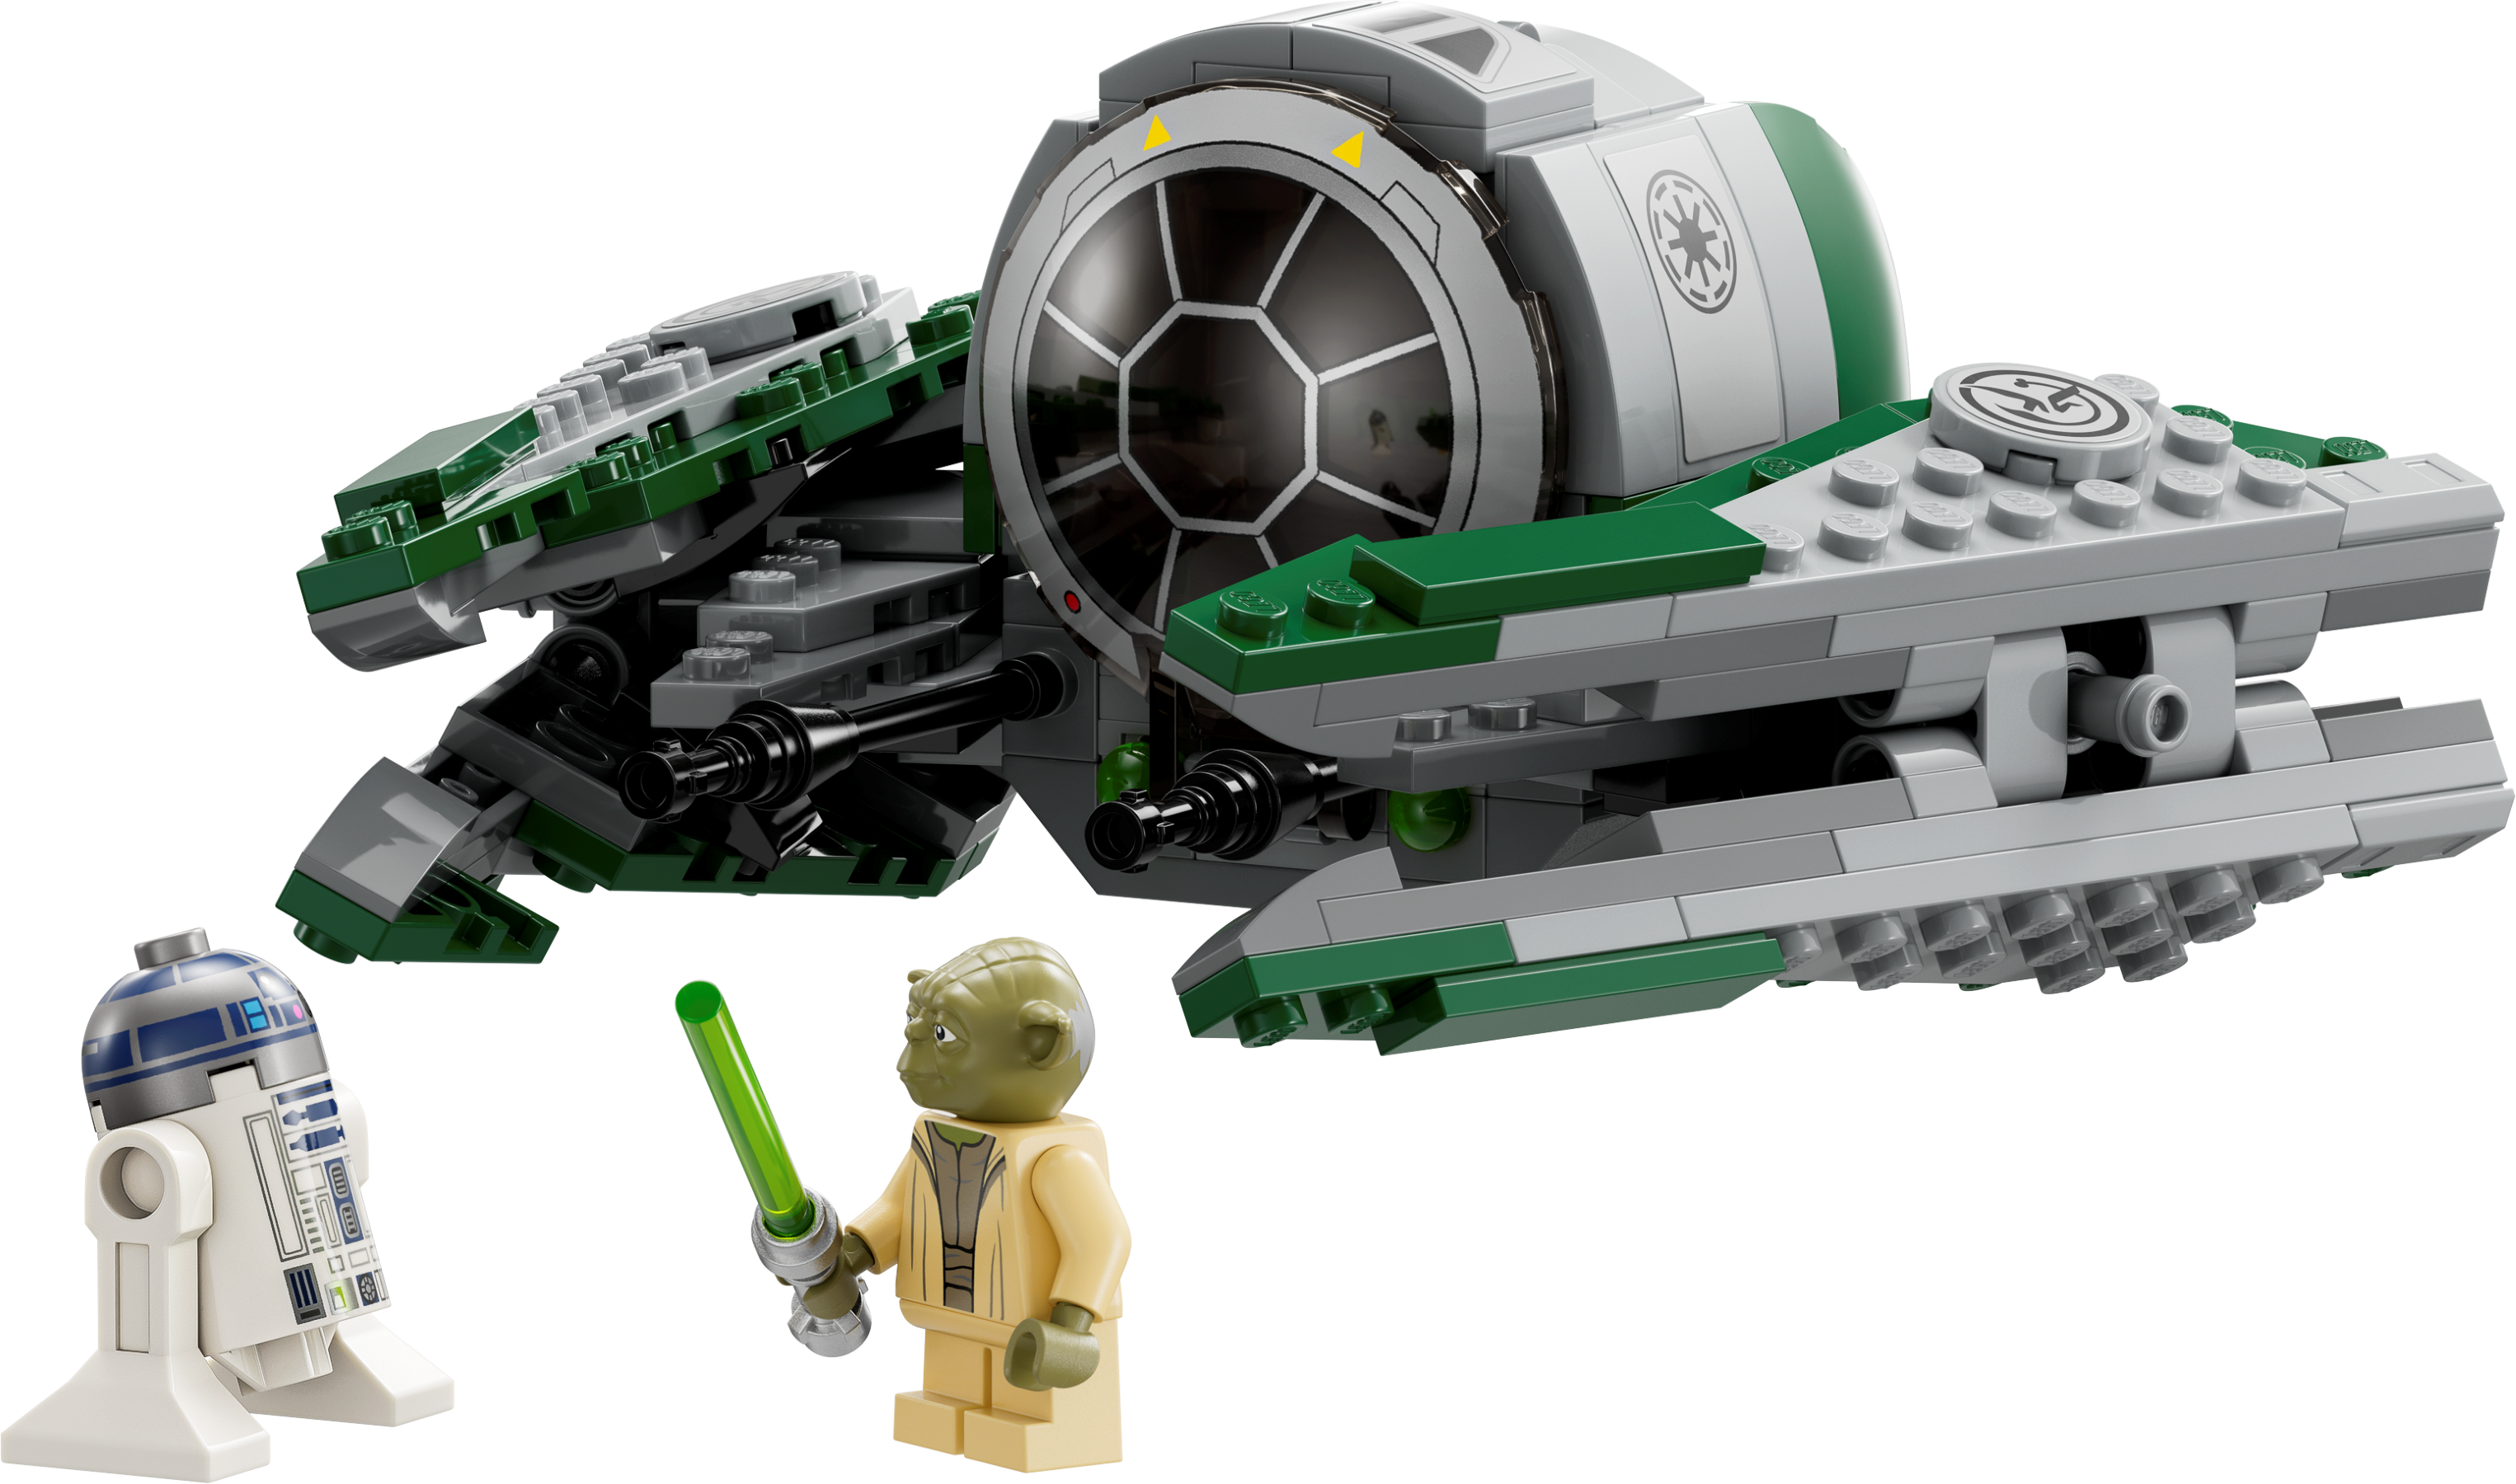 lego star wars pictures